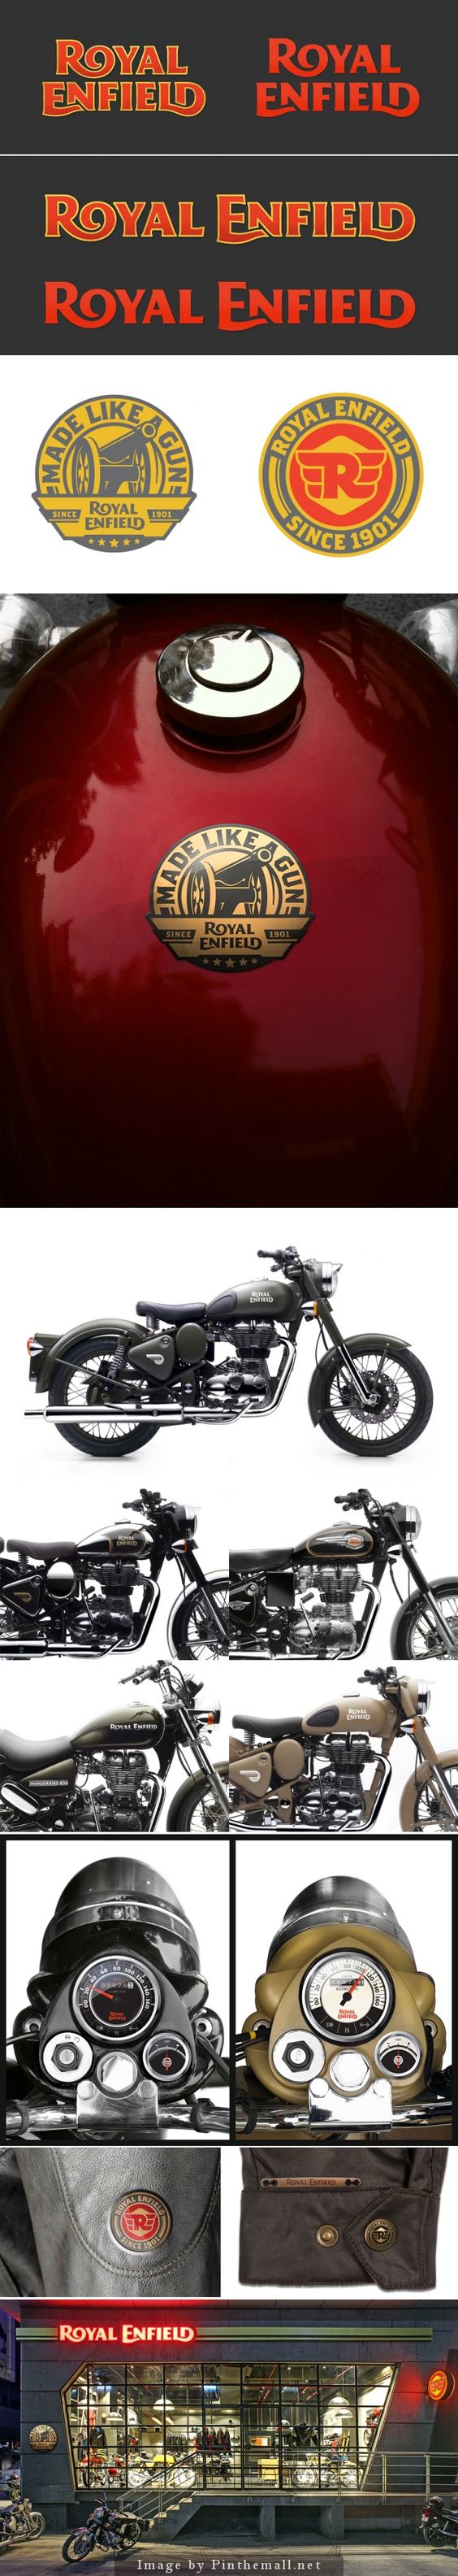 New Logo and Identity for Royal Enfield by Codesign.